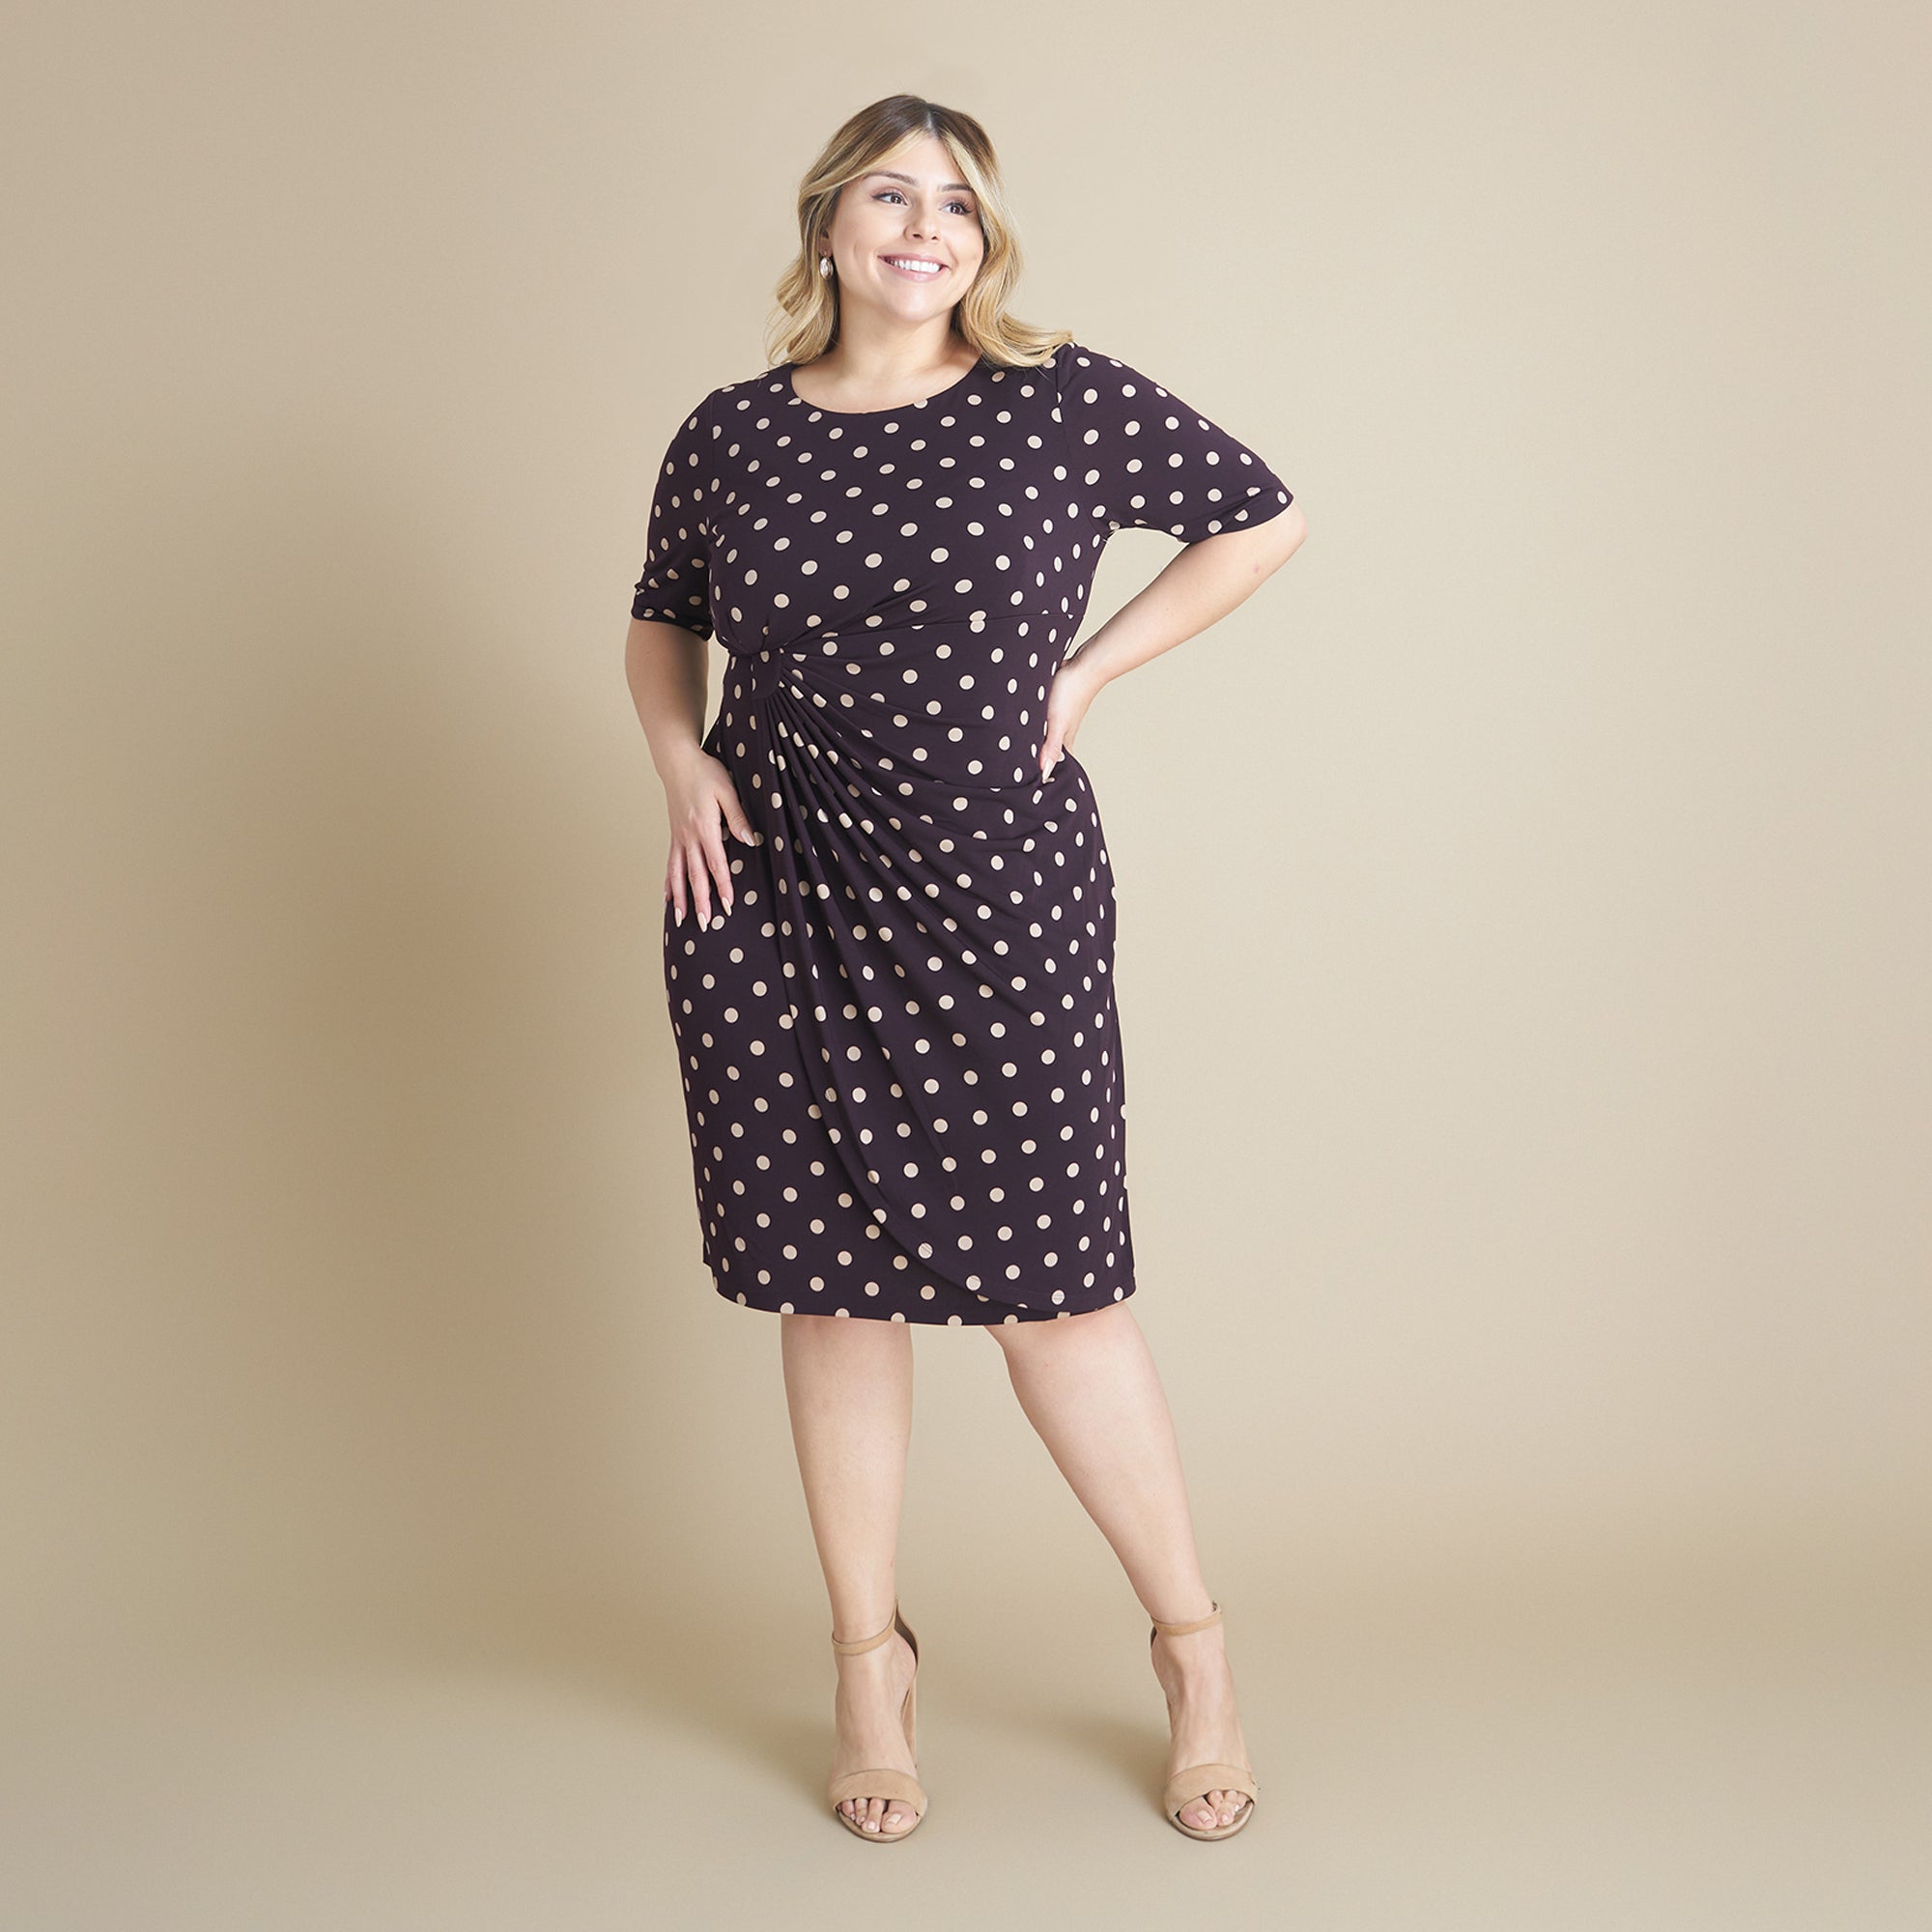 Connected Apparel | Affordable & Flattering Dresses